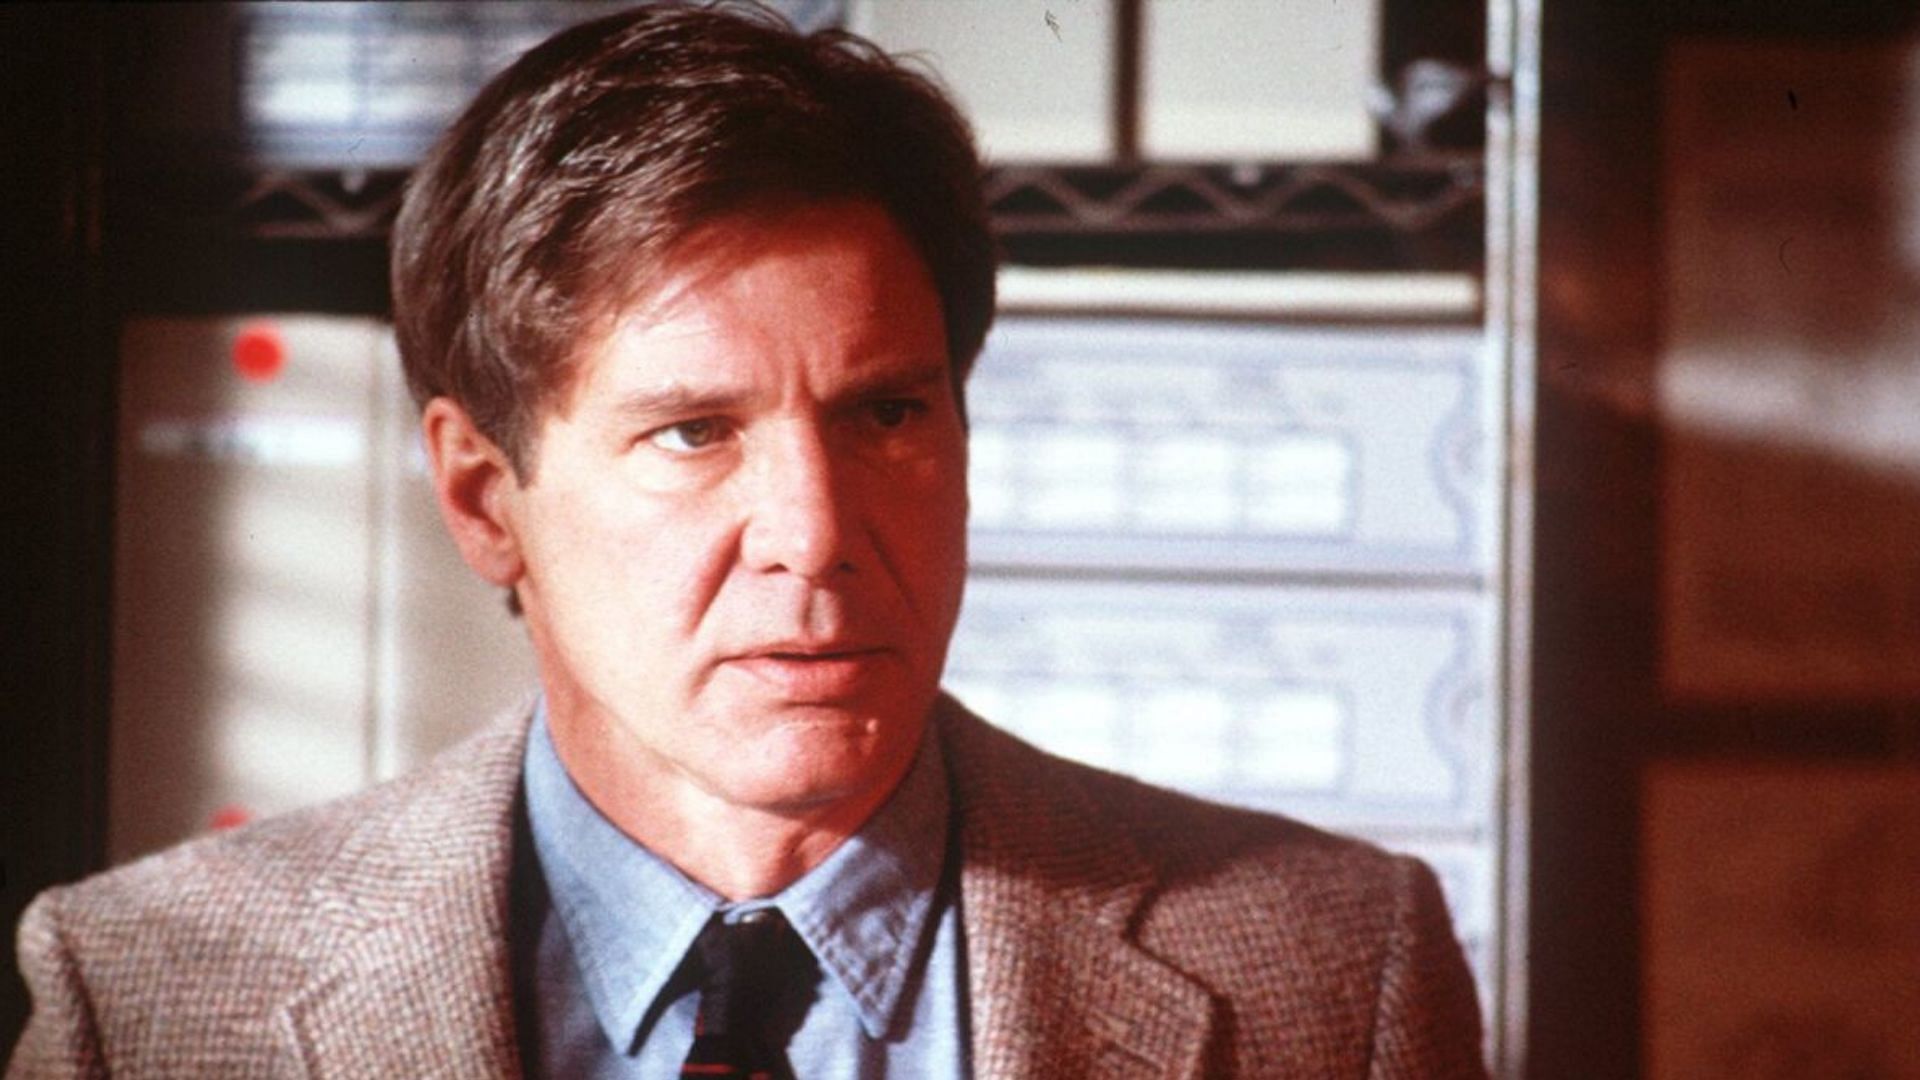 Ford in The Fugitive (Image via Los Angeles Times)